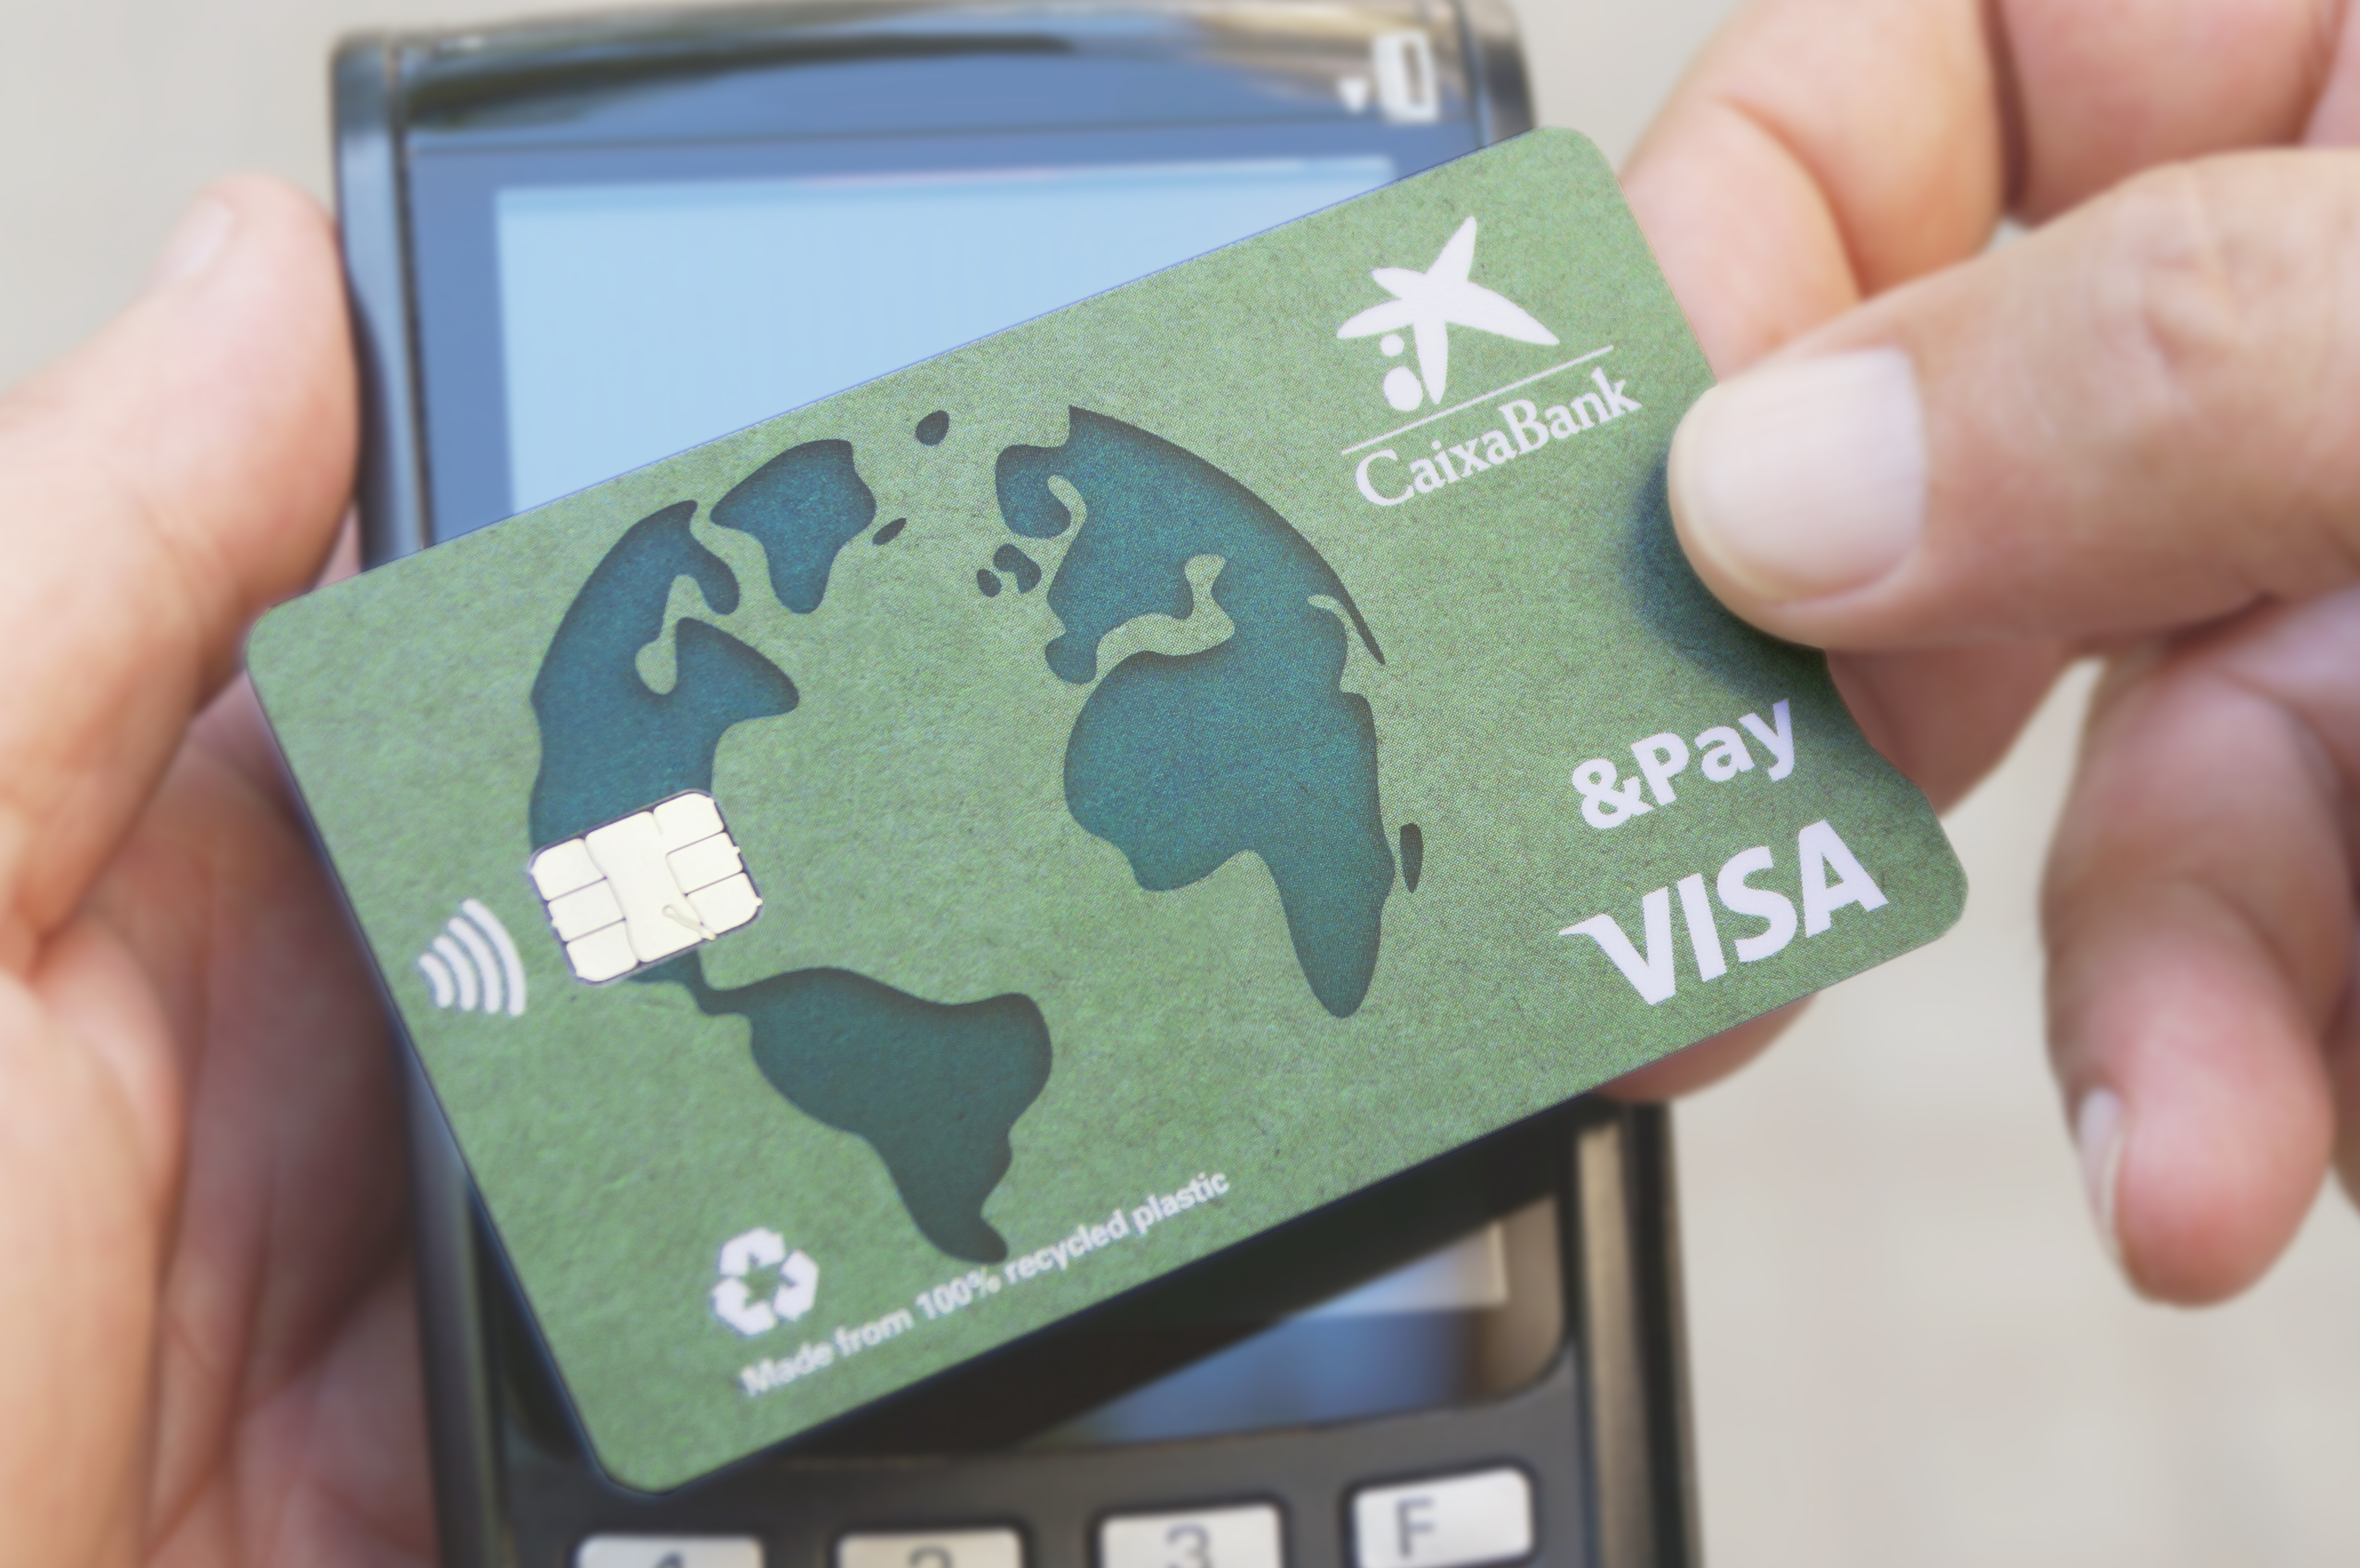 CaixaBank launches the first credit card in Spain made with 100% recycled plastic